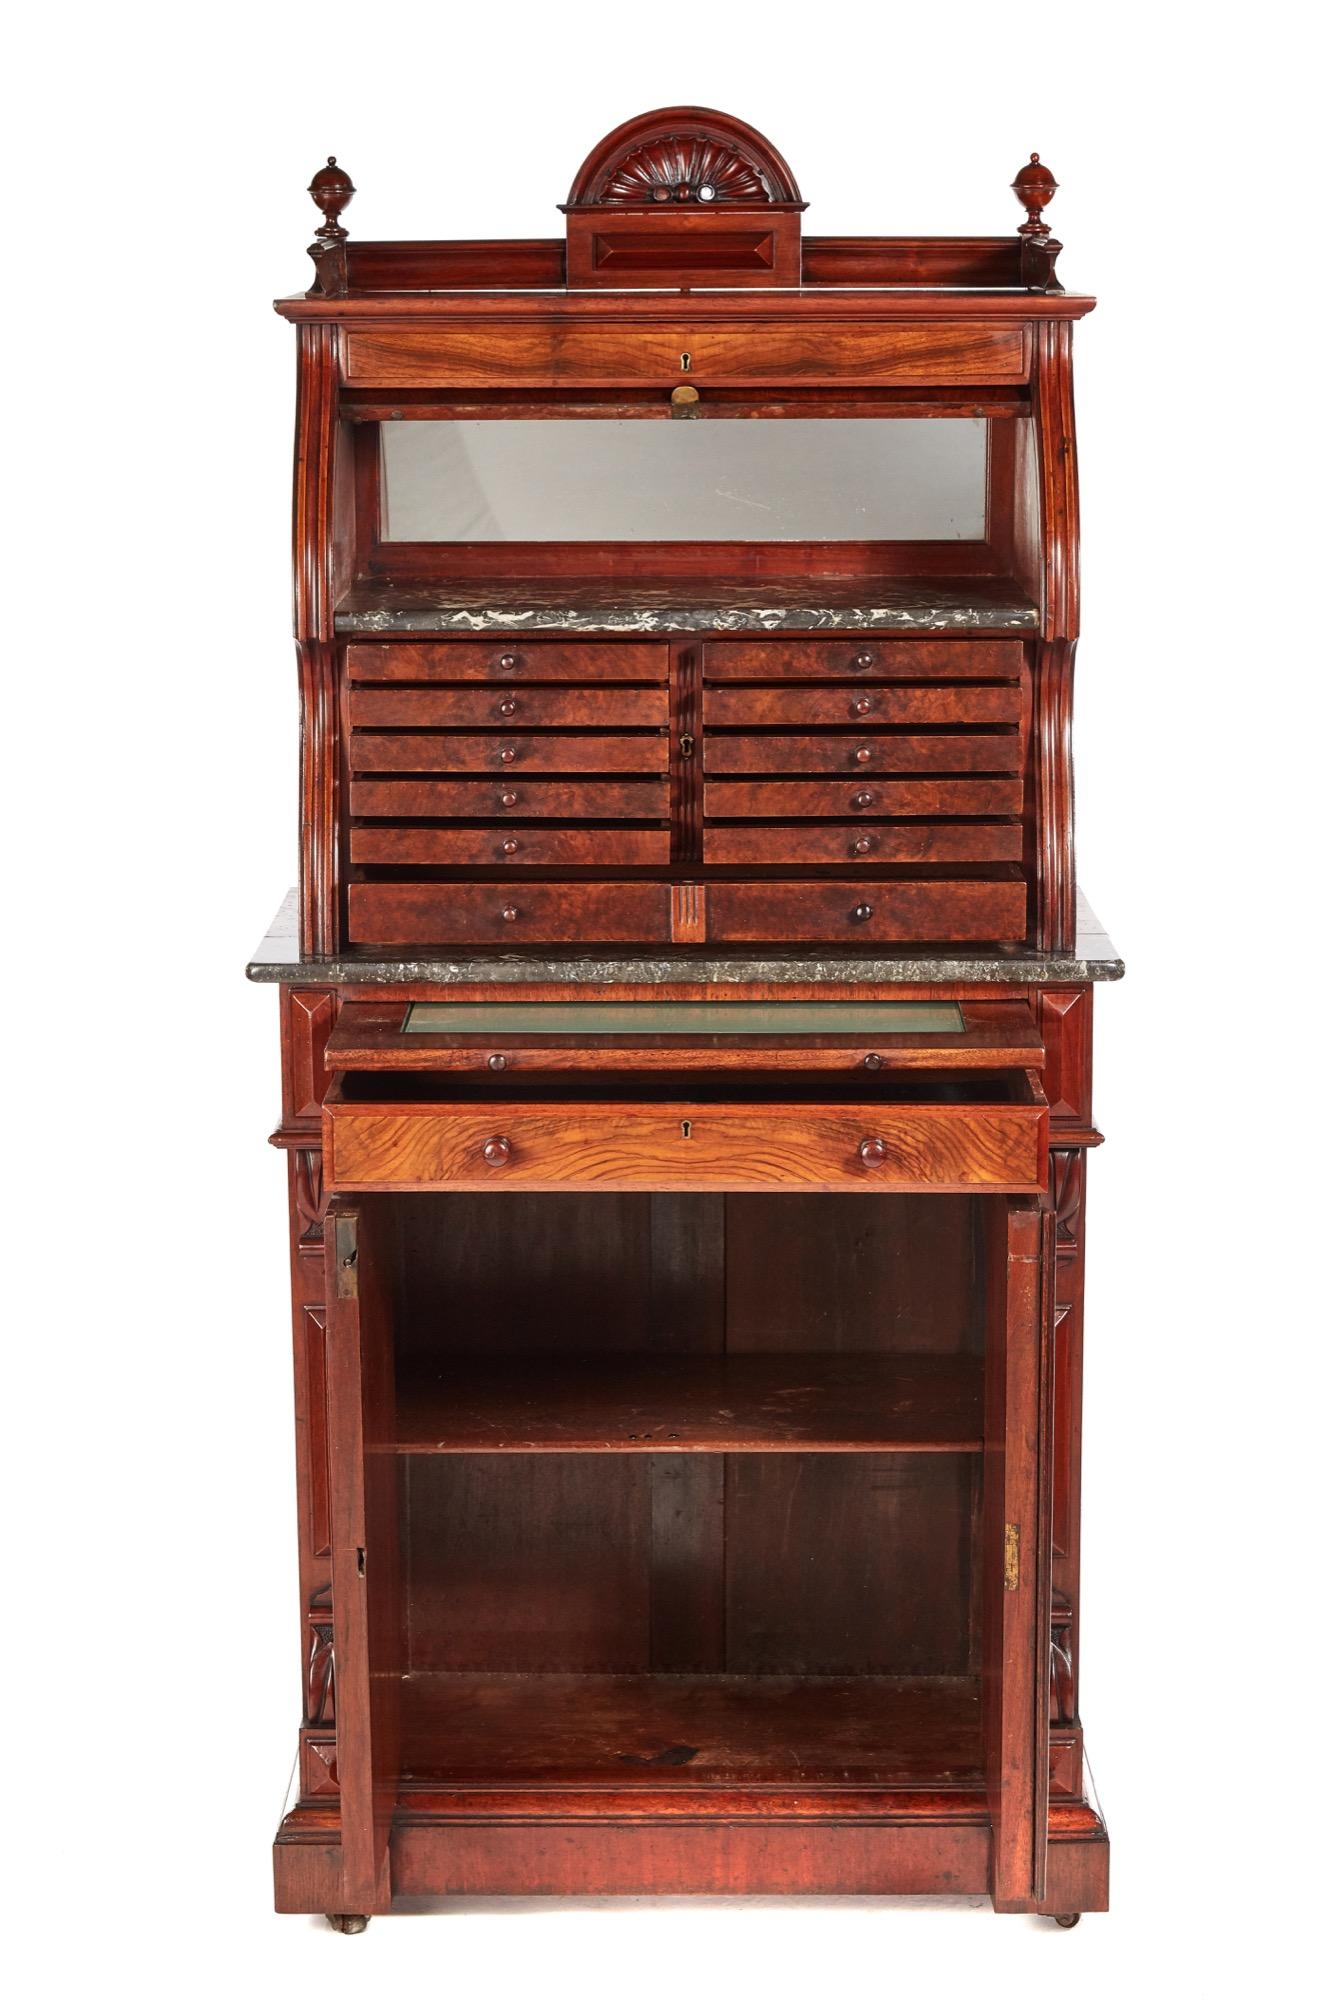 Fantastic burr walnut dentist cabinet with a carved shell top gallery and a burr walnut cylinder that opens to reveal a mirror and grey variegated and speckled marble, 12 graduated burr walnut drawers with original turned walnut knobs. The base with